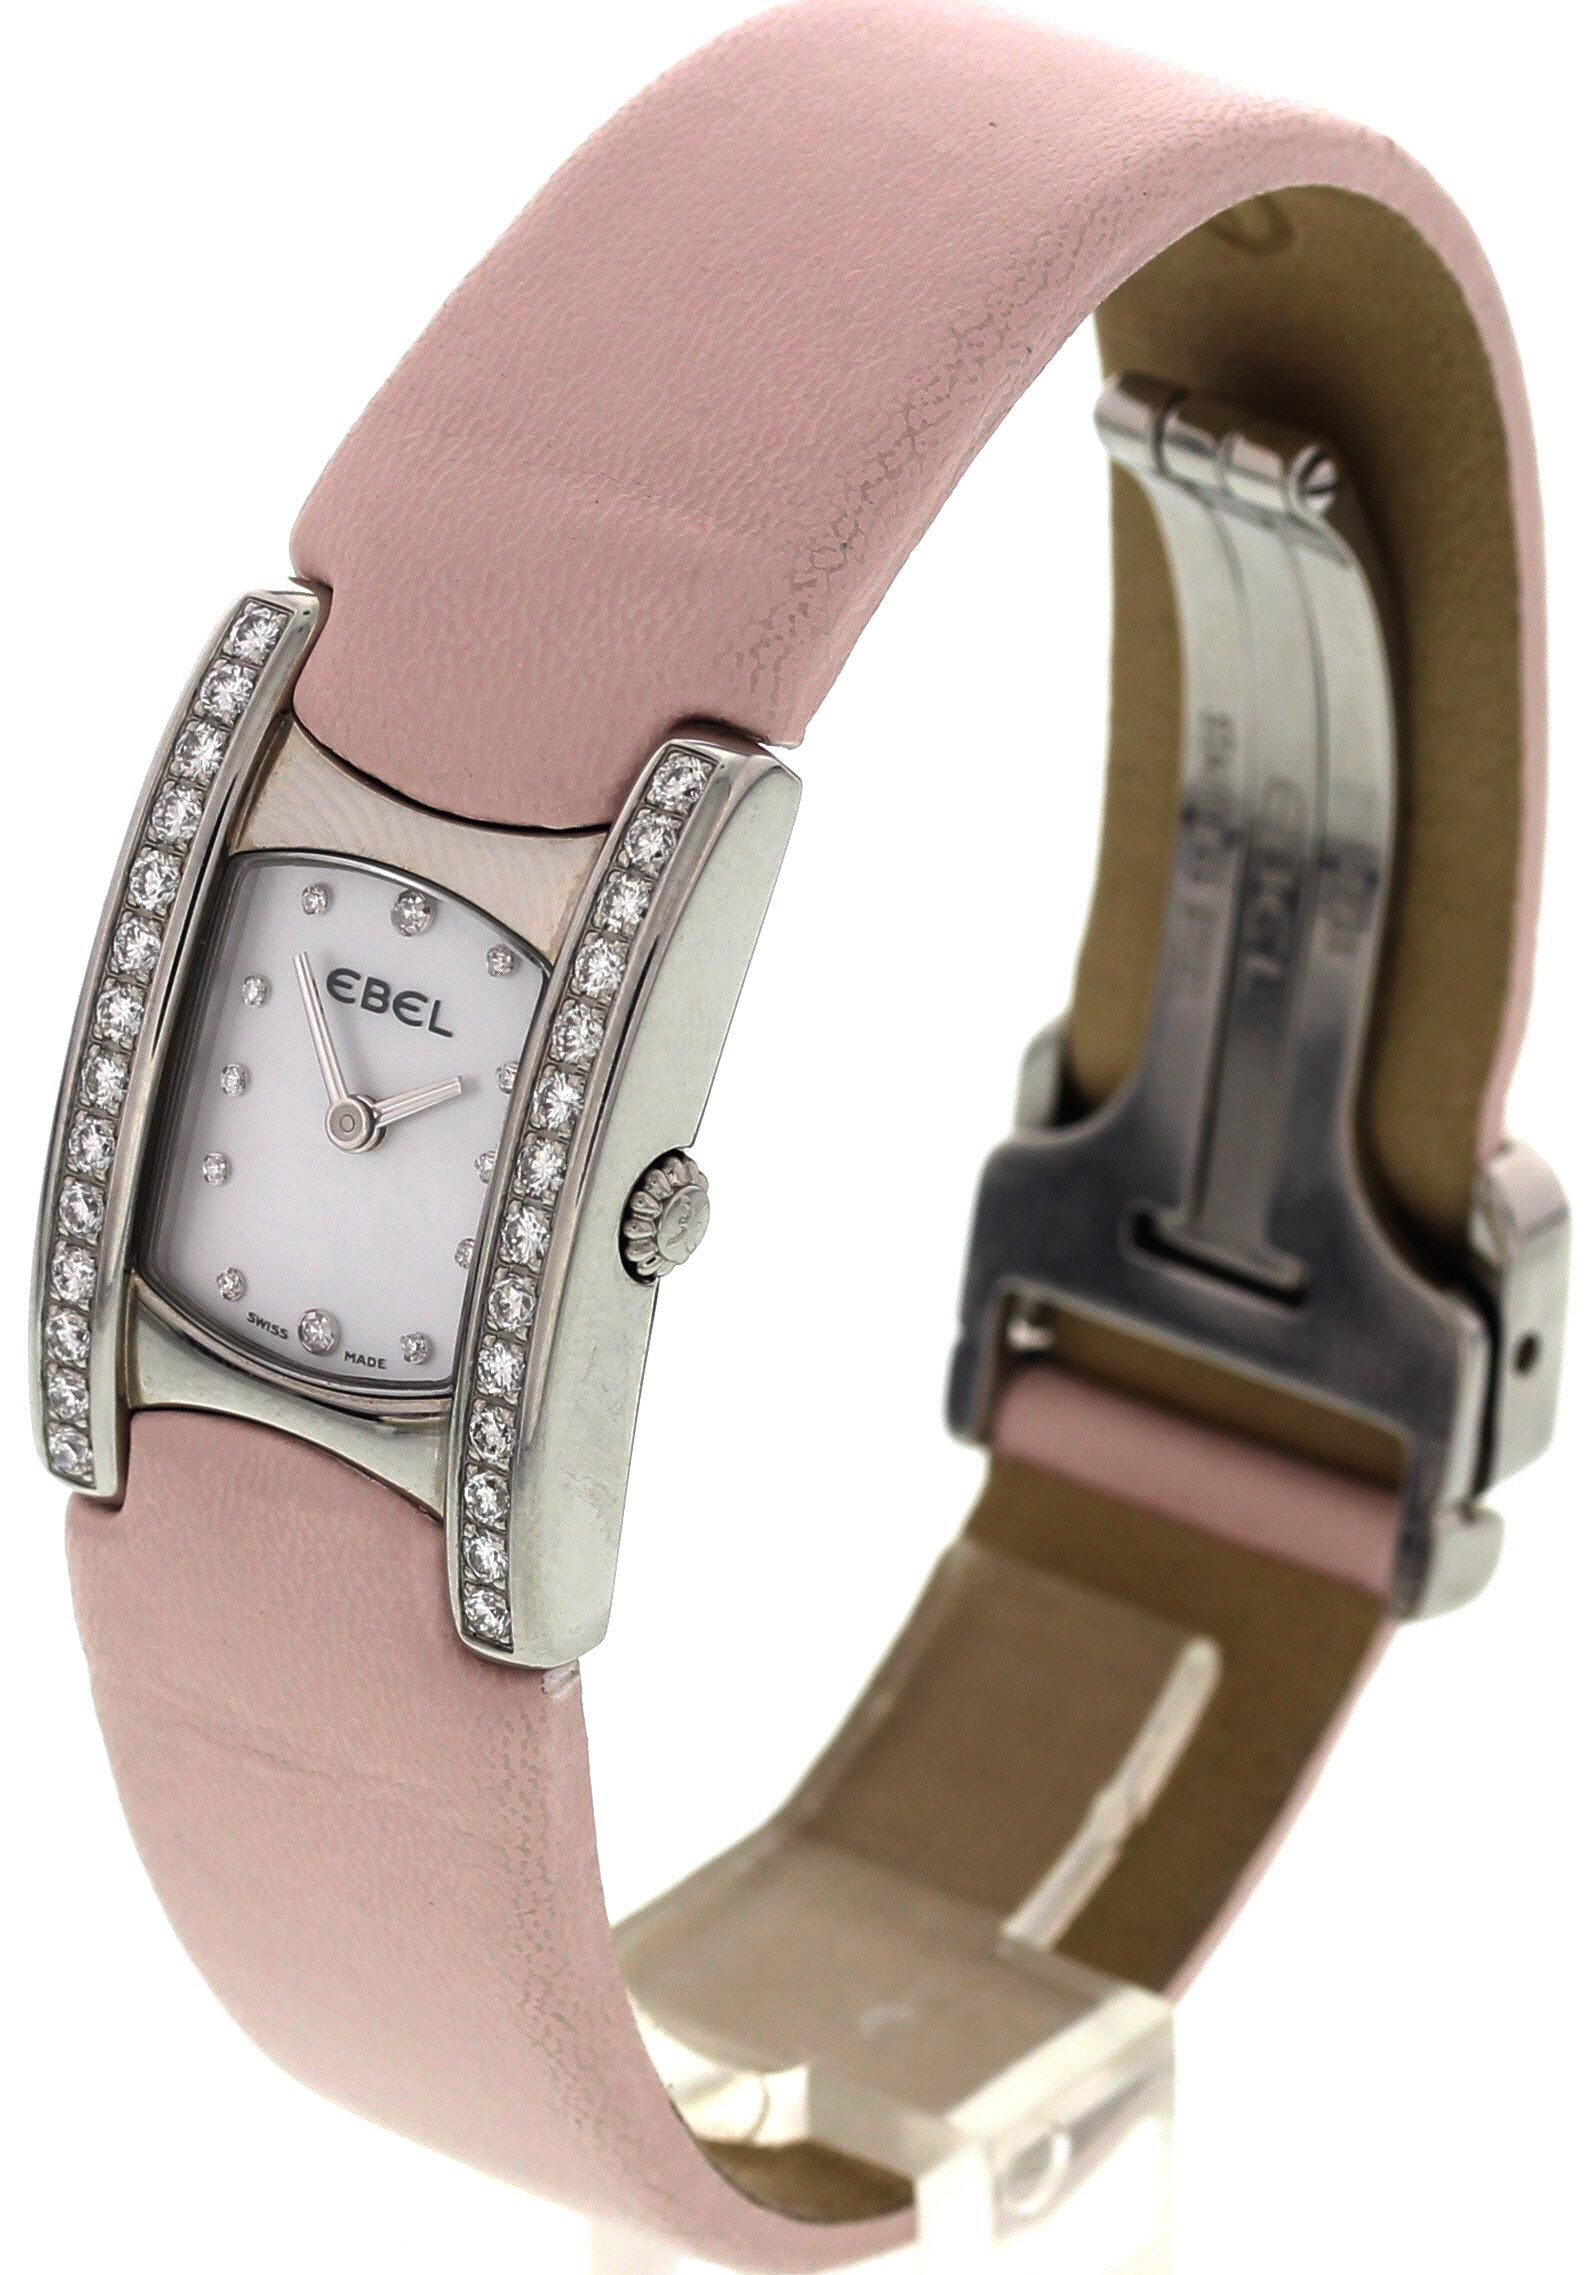 Ladies Ebel Beluga watch. 20 mm stainless steel case square case. Diamond bezel. Mother of pearl dial with diamond markers. Light pink leather band with a stainless steel folding clasp. Quartz movement. Sapphire crystal. Reference 42555079.
